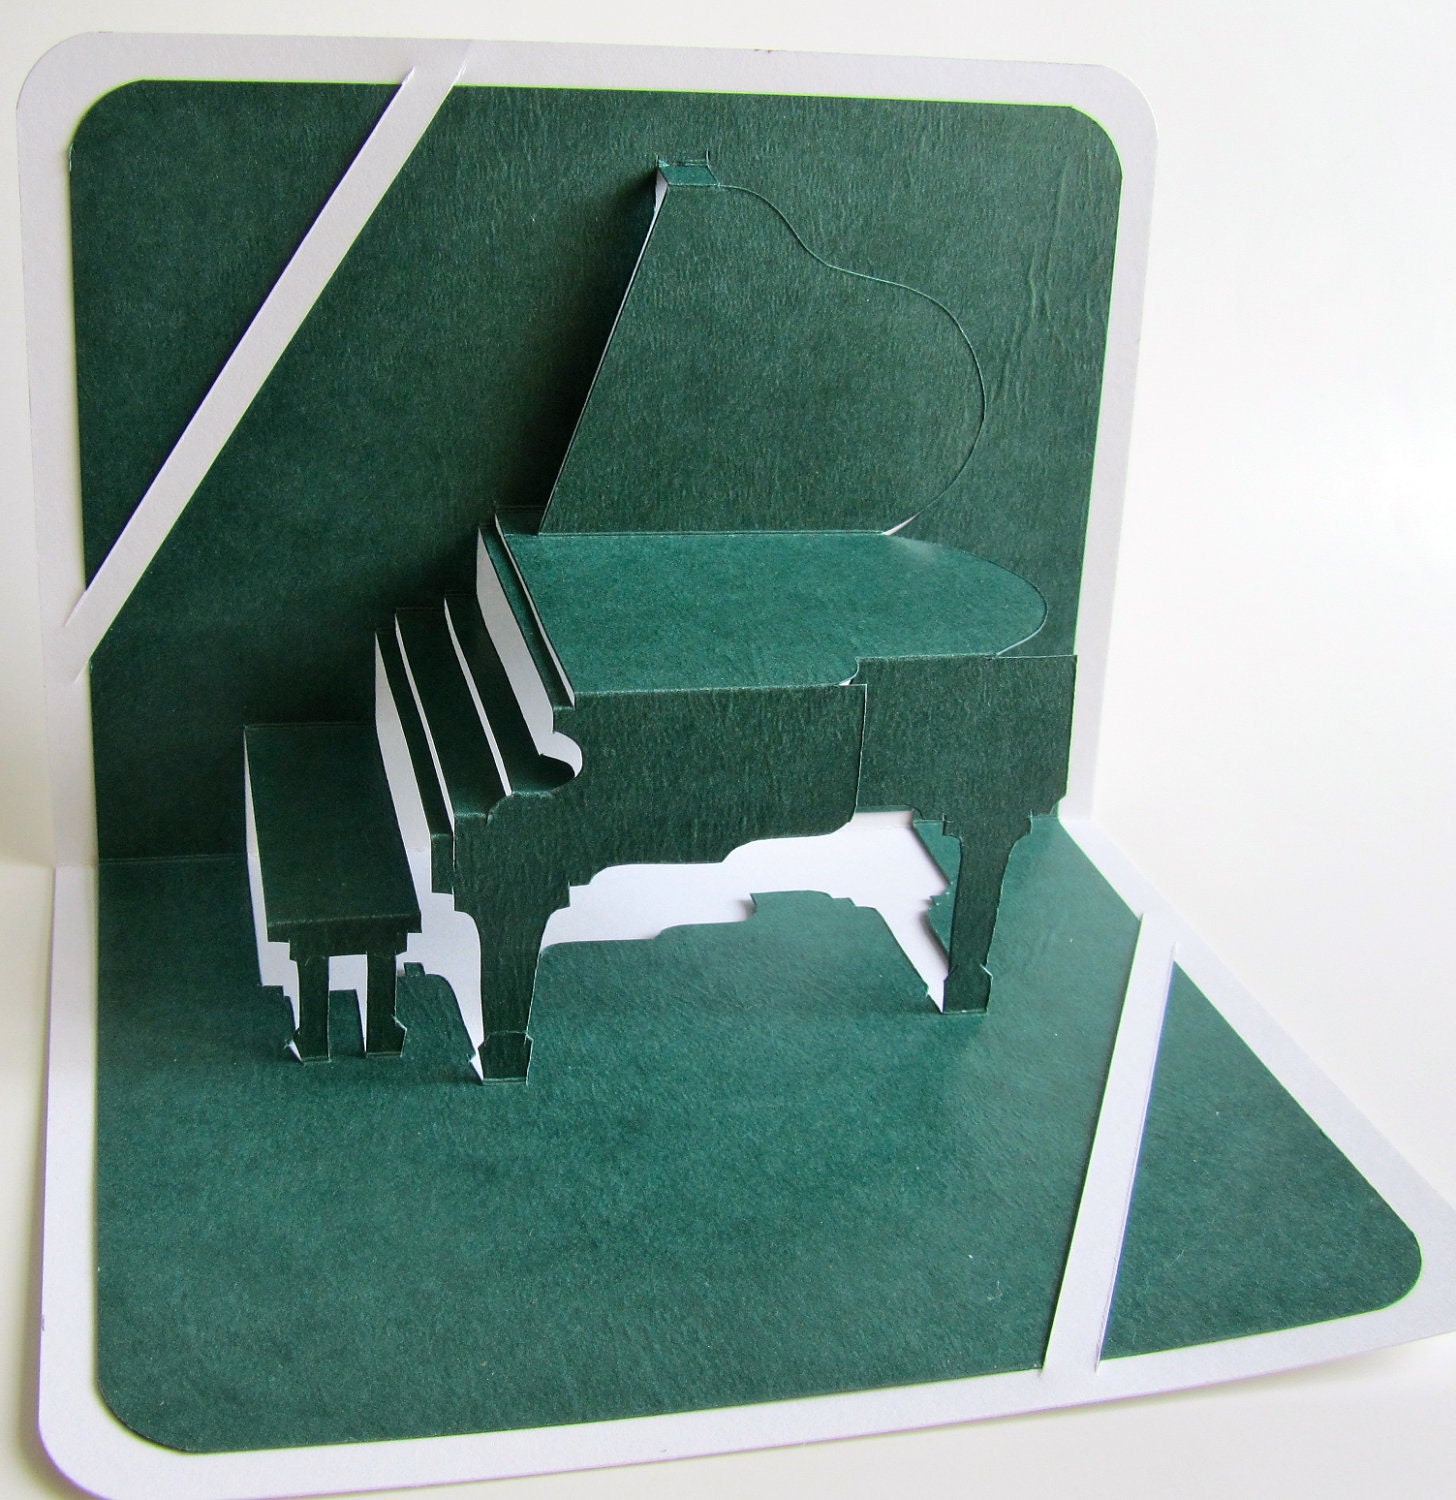 GRAND PIANO 3D Pop Up Card Origamic Architecture Home Decoration Handmade Handcut in Forest Green and White